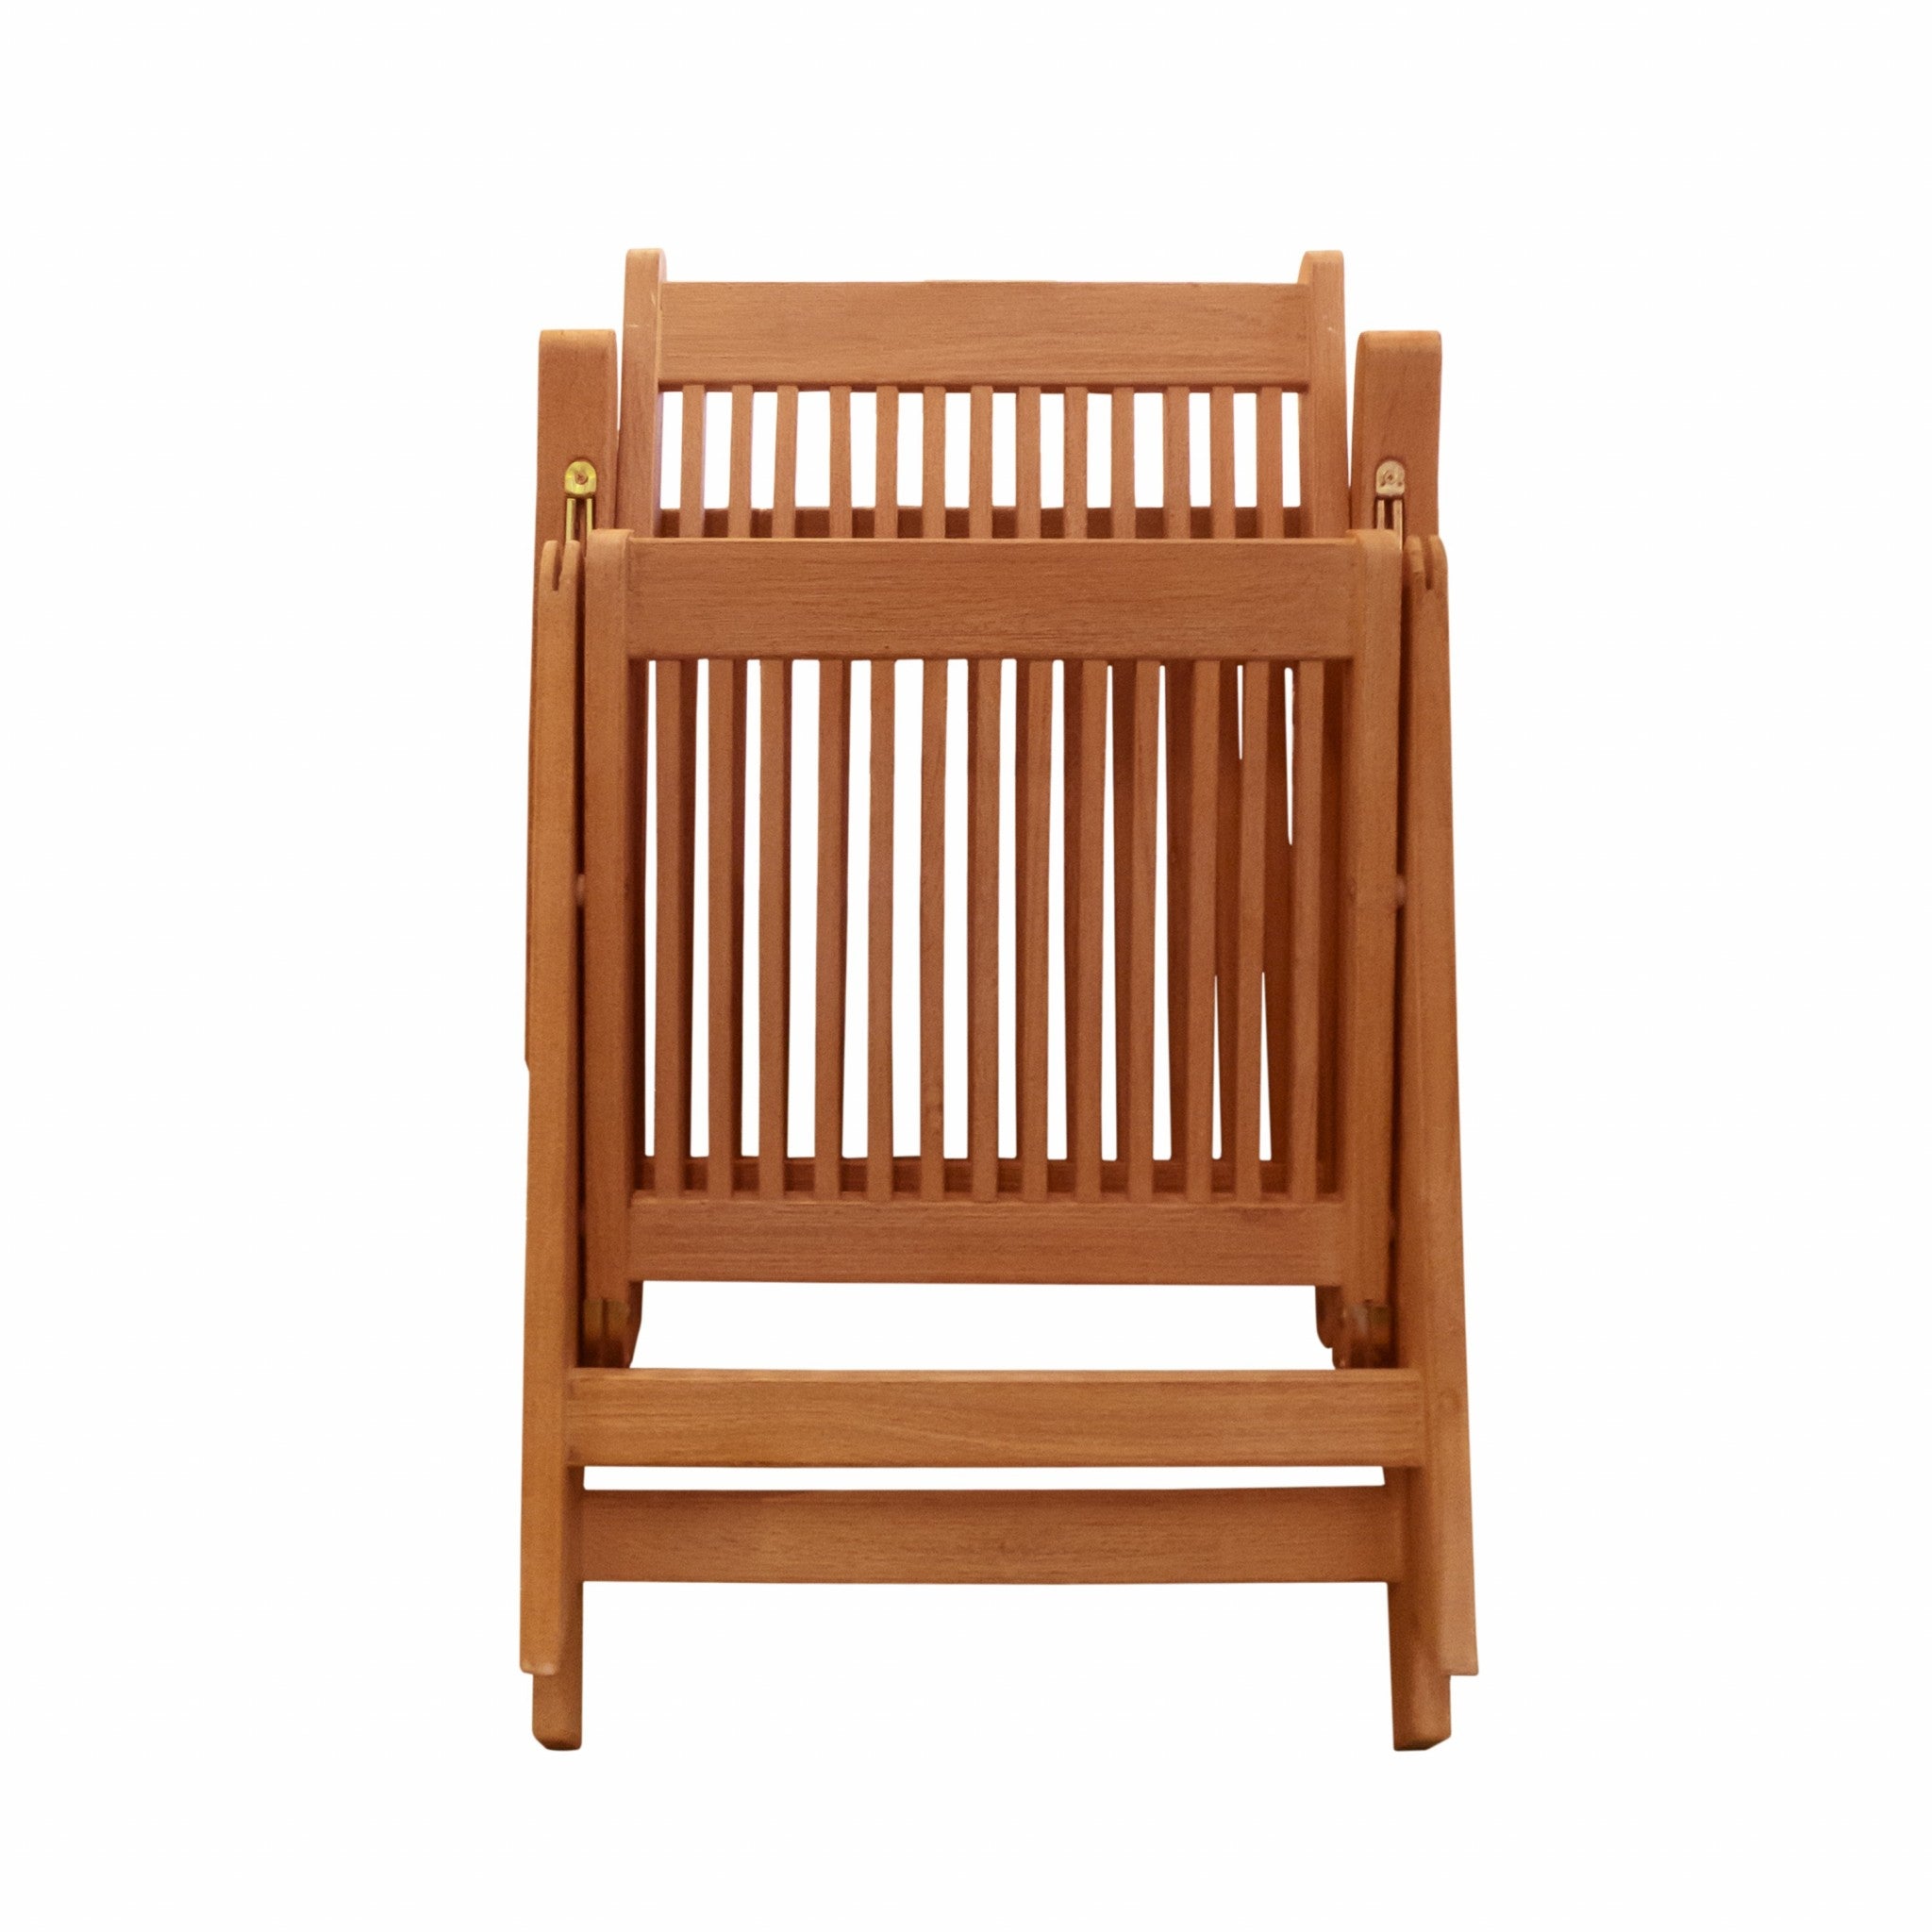 Brown Outdoor Reclining Chair - Tuesday Morning-Outdoor Chairs